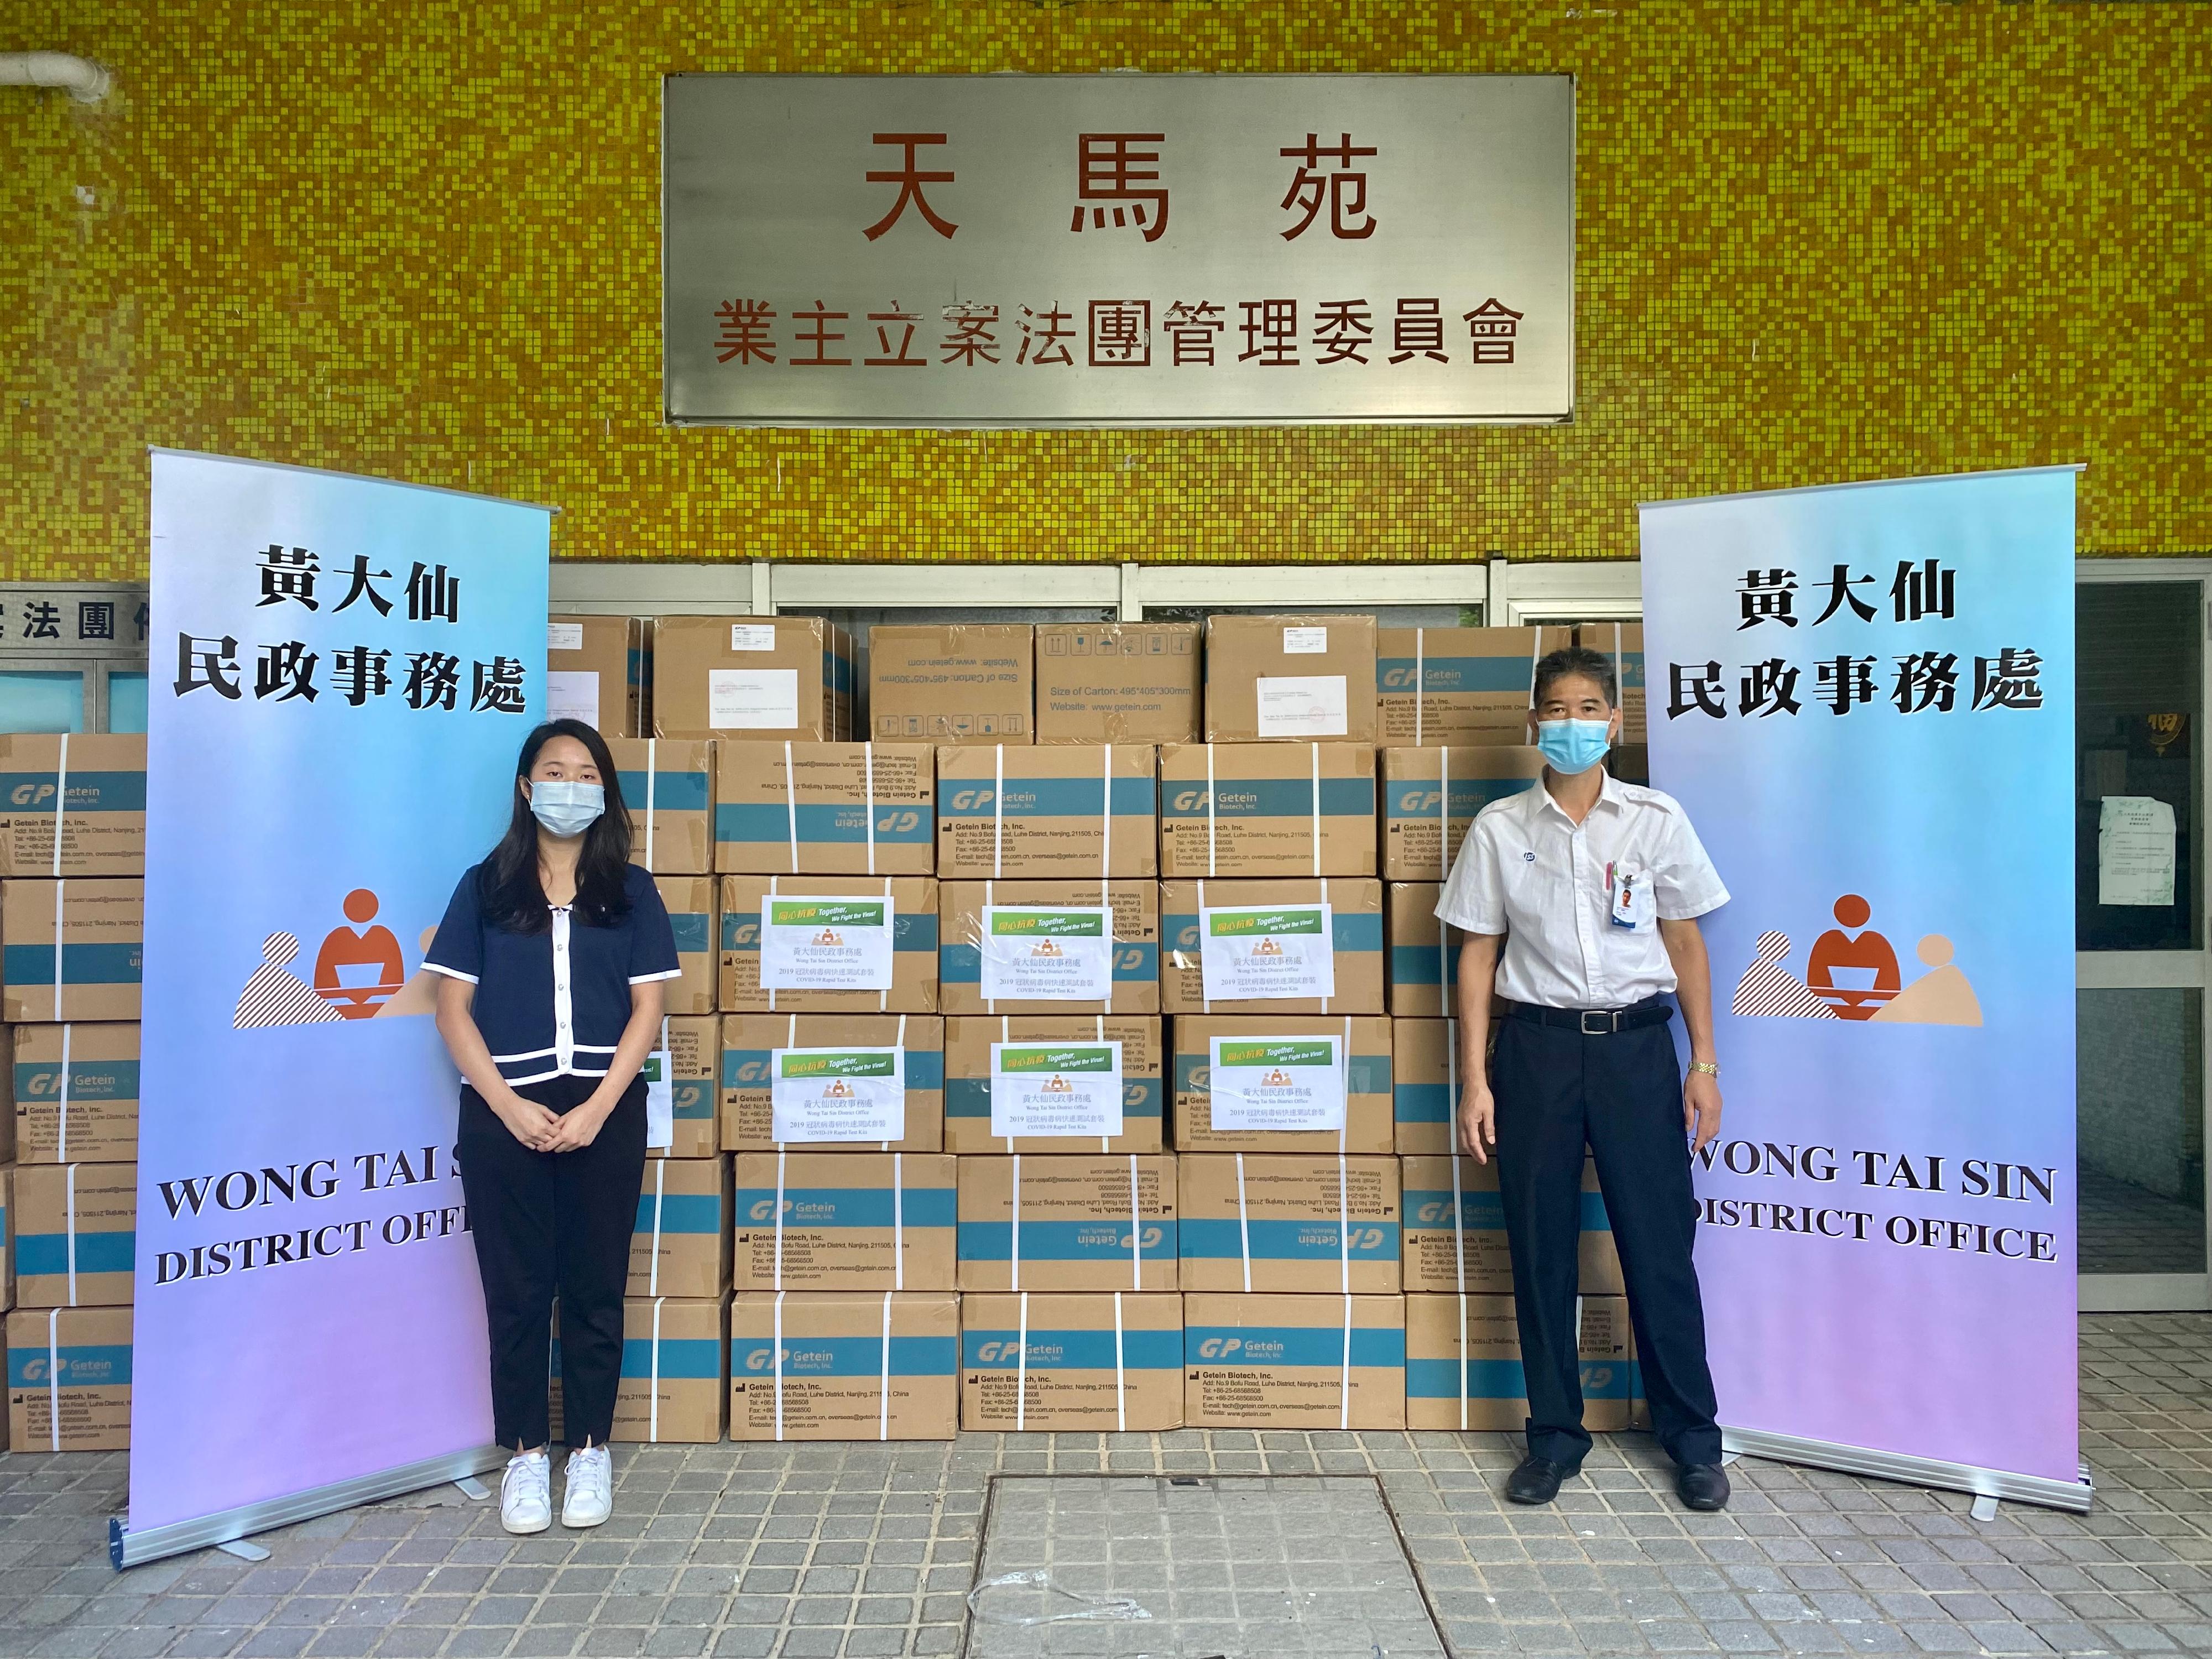 The Wong Tai Sin District Office today (July 21) distributed COVID-19 rapid test kits to households, cleansing workers and property management staff living and working in Tin Ma Court for voluntary testing through the property management company.